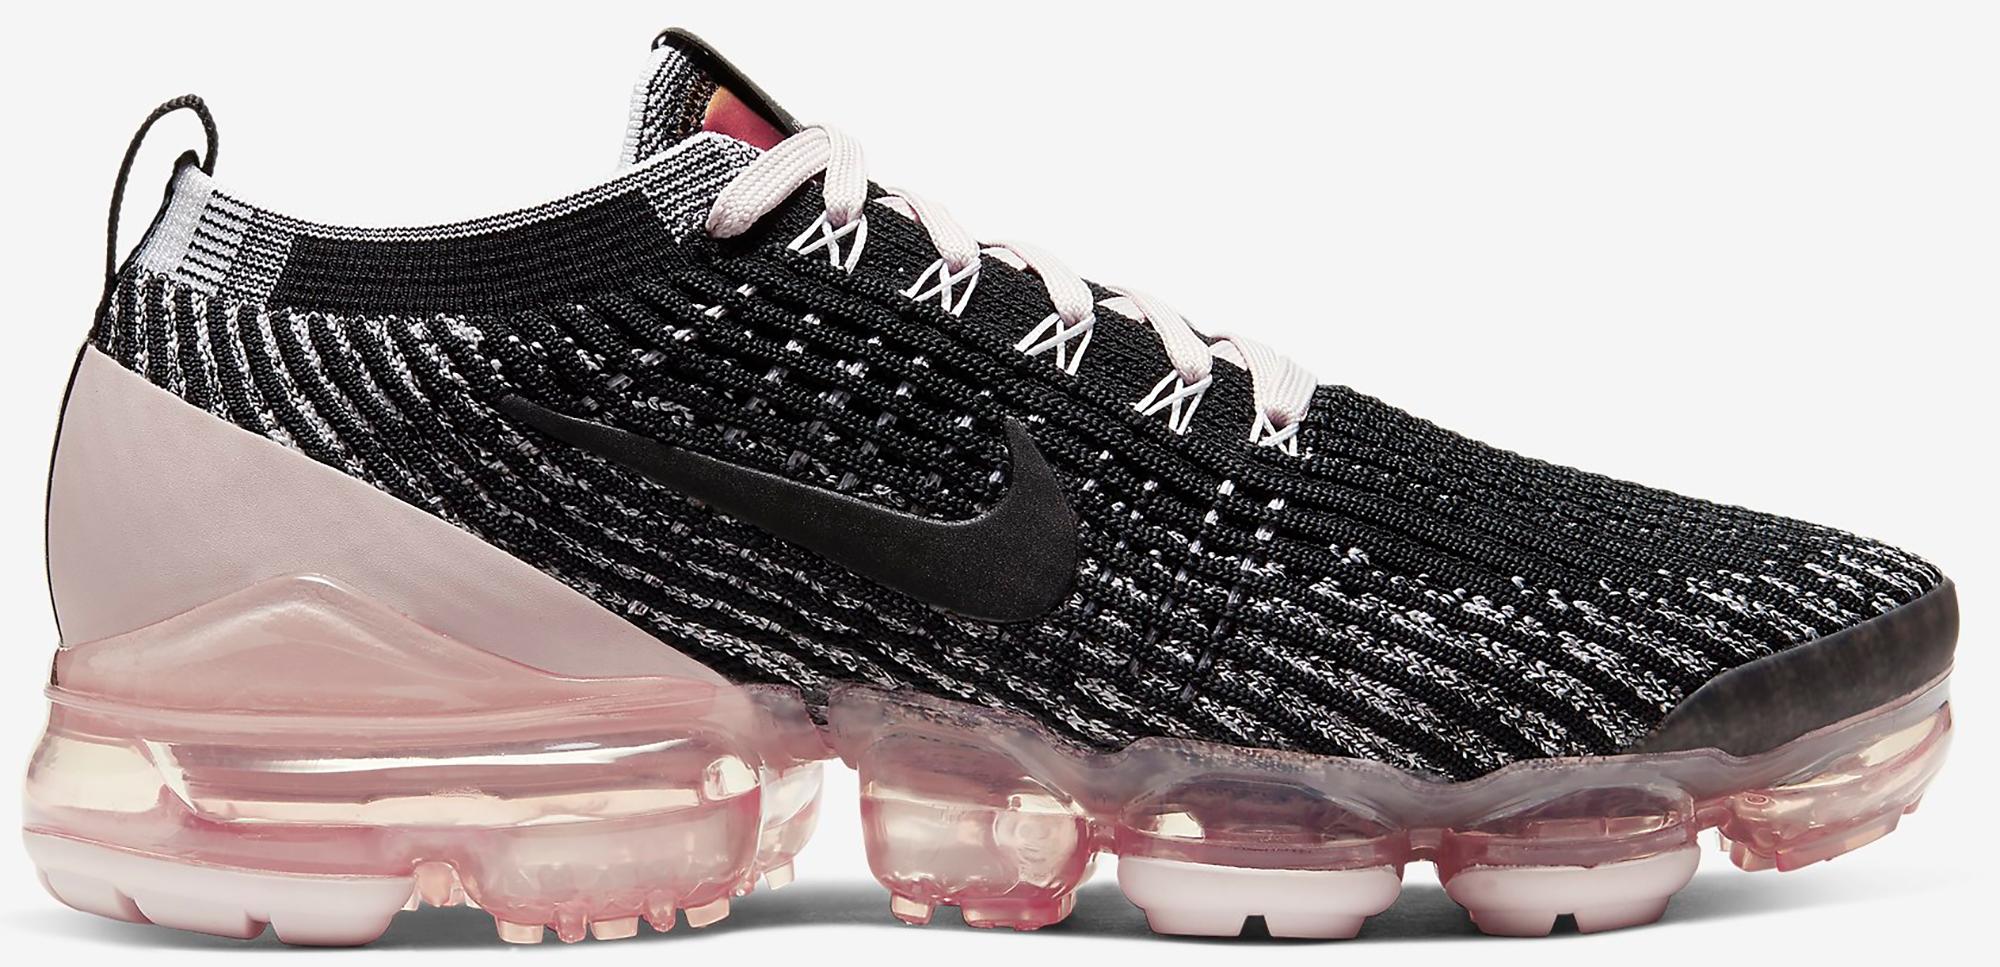 vapormax flyknit 3 black and pink